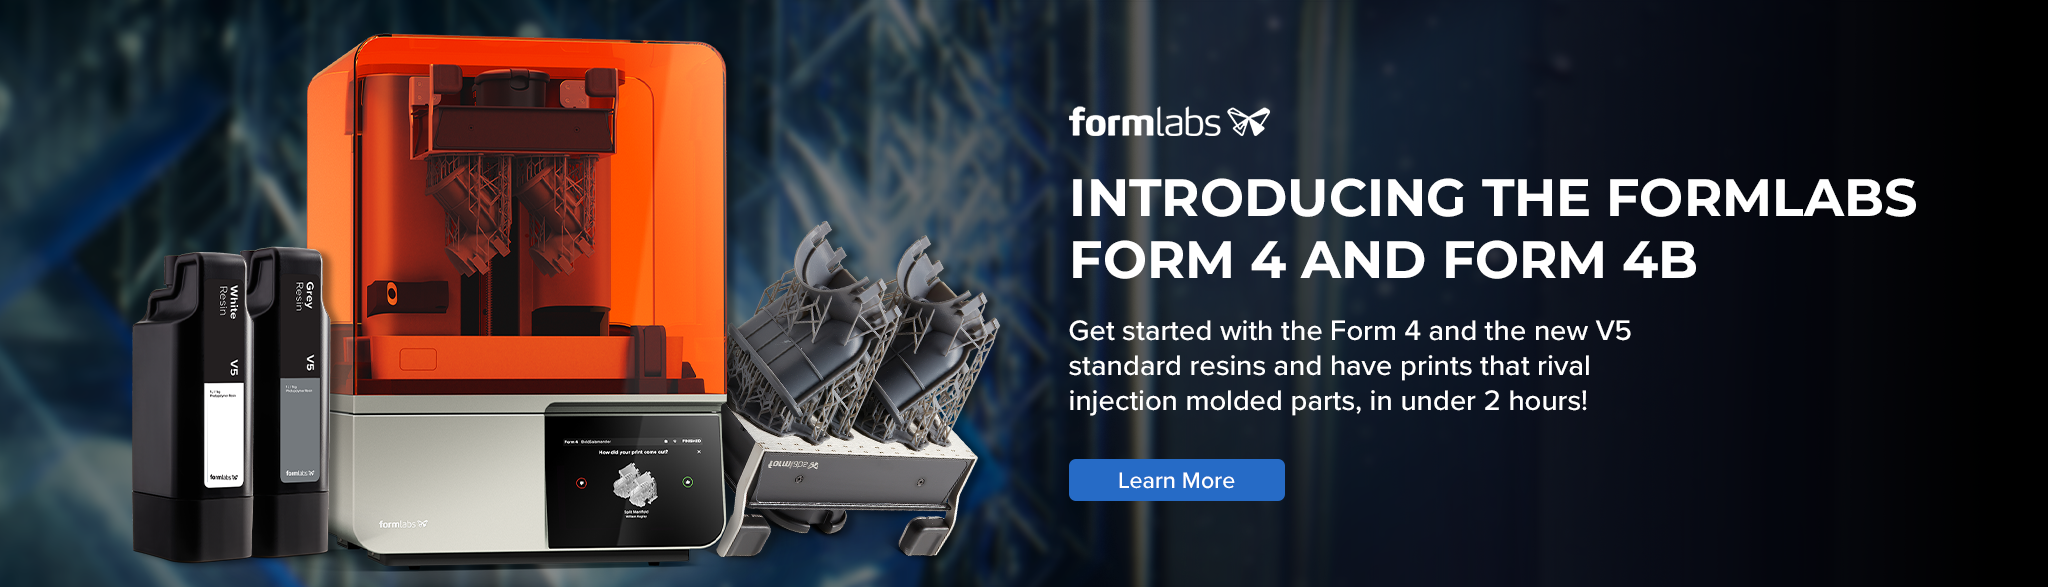 A banner showing Formlabs Form 4